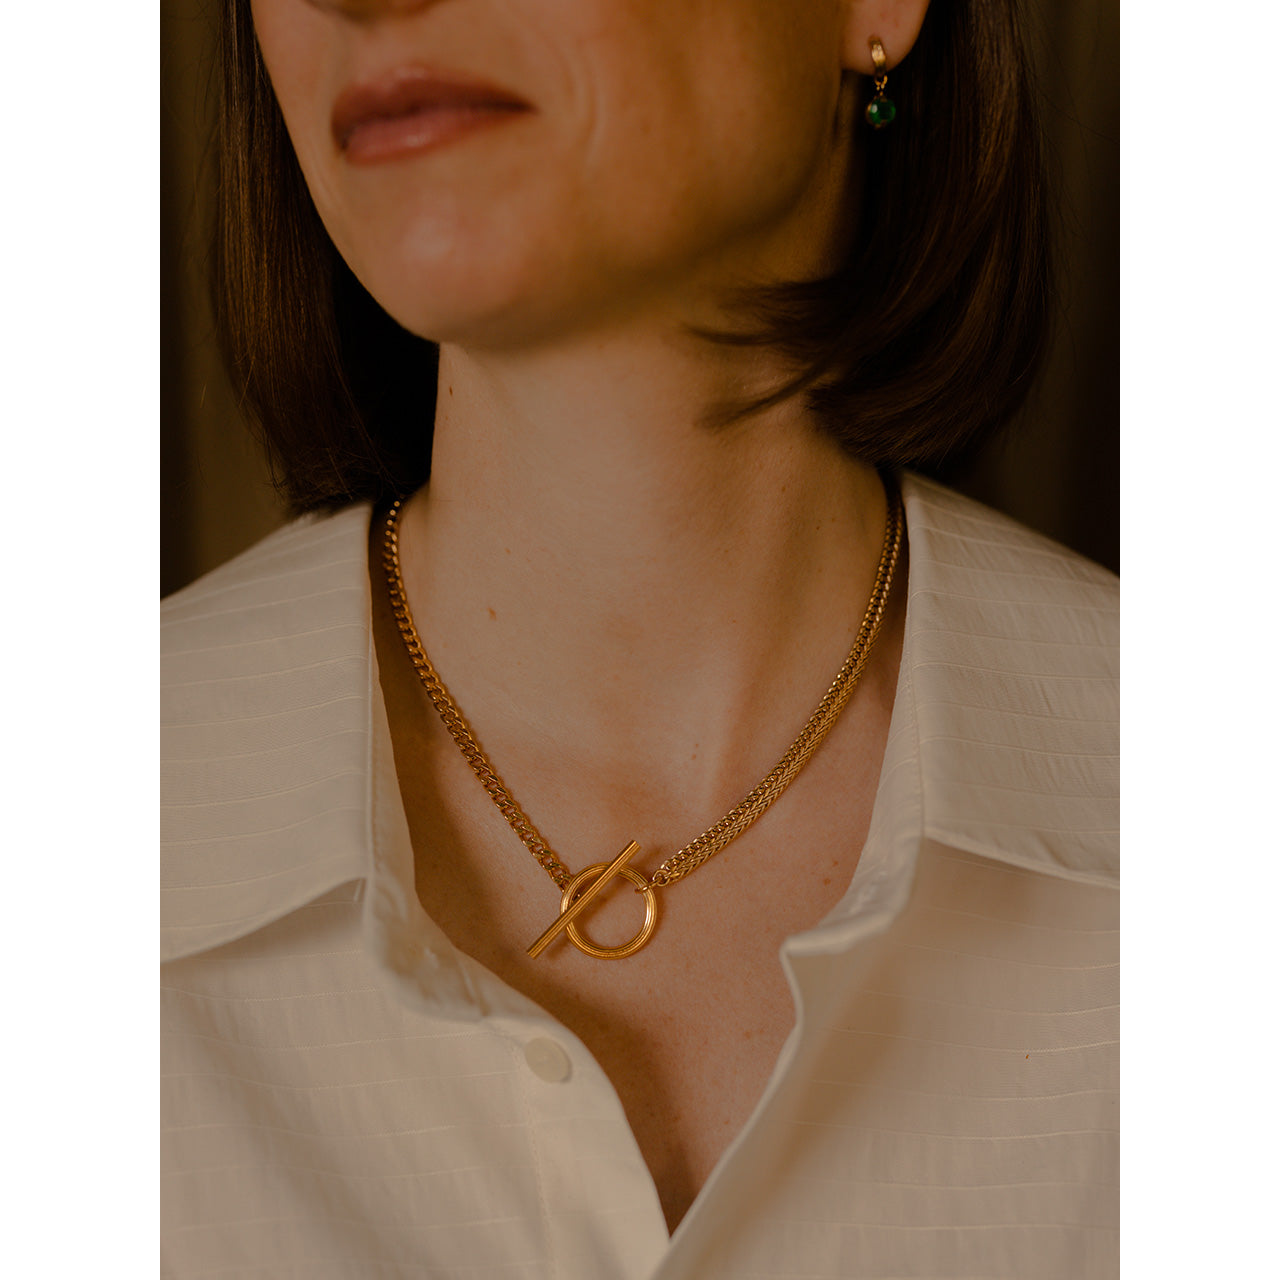 The Carve necklace perfectly complements the Carve earrings and bracelet.